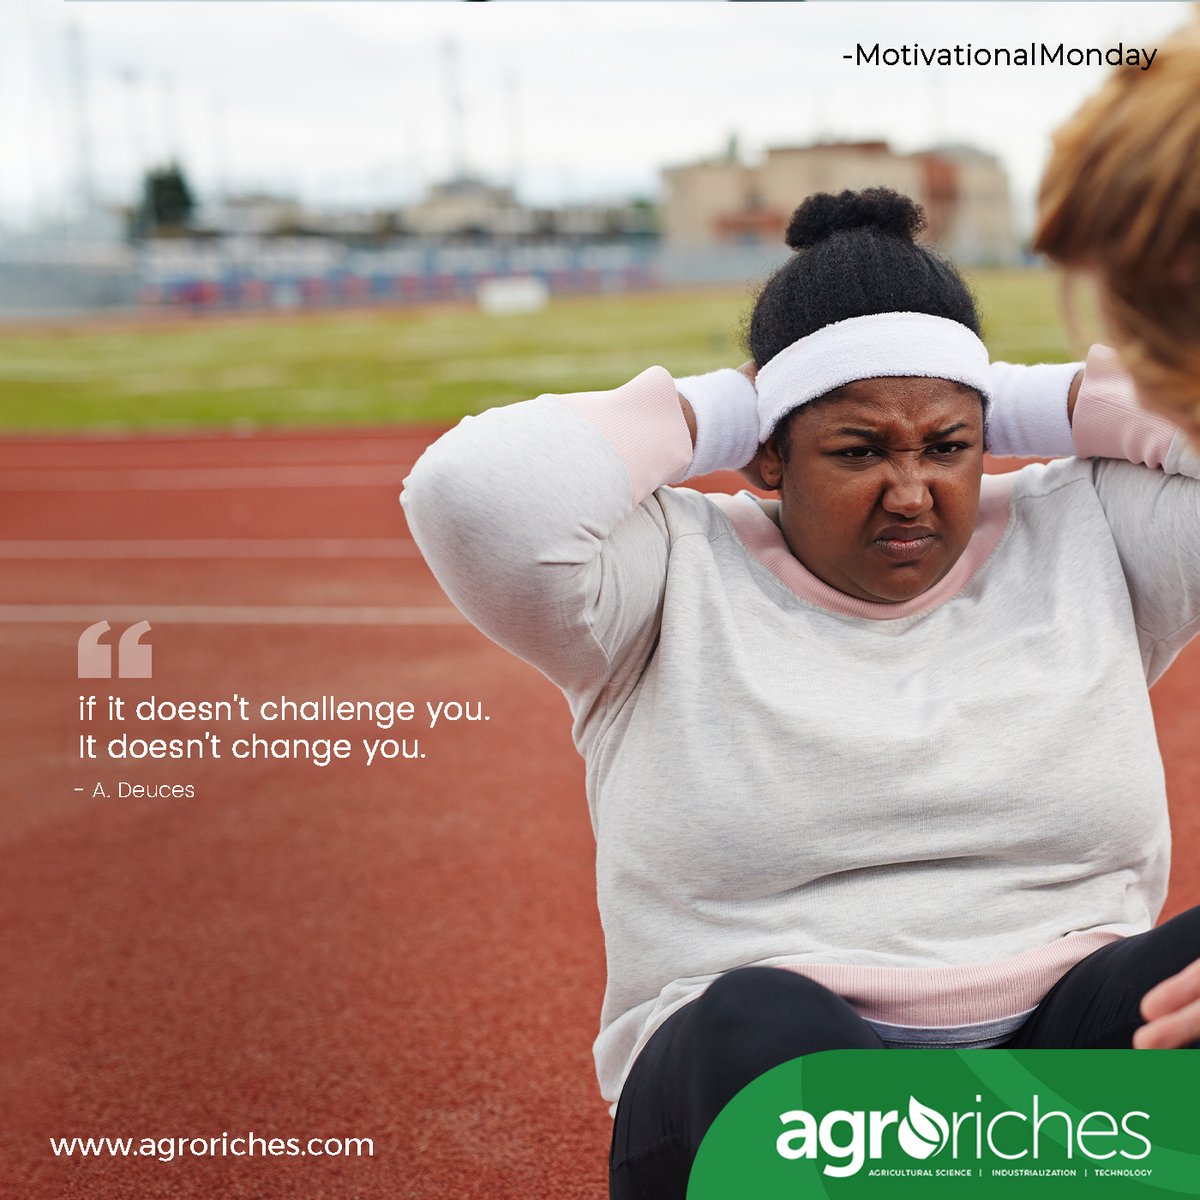 Life is meant to be a challenge, because challenges make you grow.
Happy New Week!

#challengeyourself #motivationalmonday #monday #newweek #freshstart #agriculture #farm #lifestyle #startup #agroriches #strivetobegreat #valueovereverything #inspiration #successful